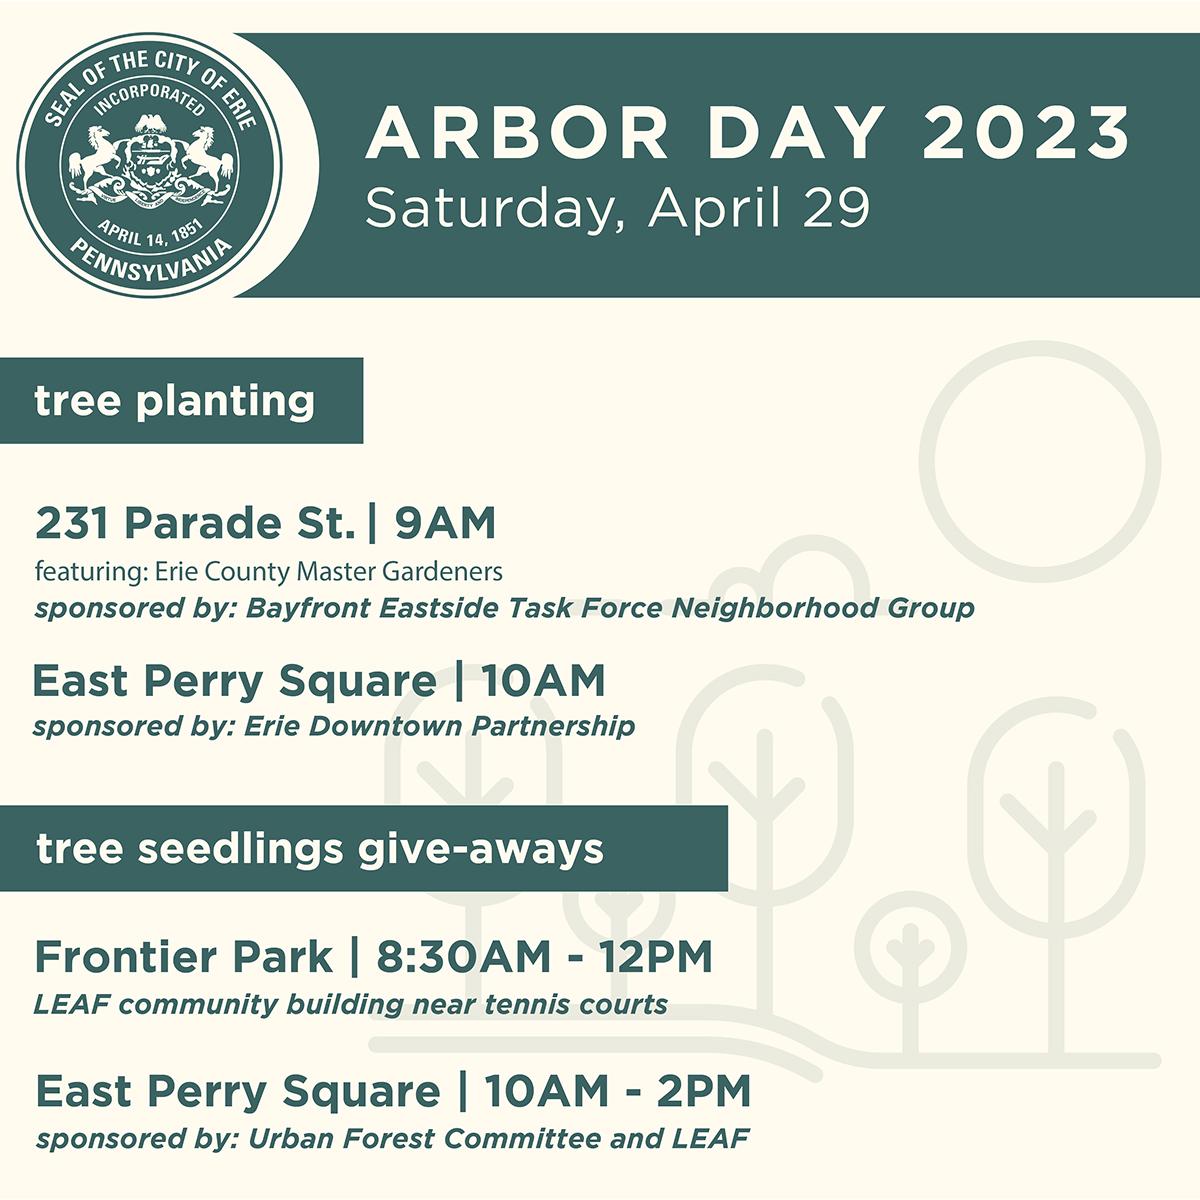 City celebrates Arbor Day with events on Saturday, April 29